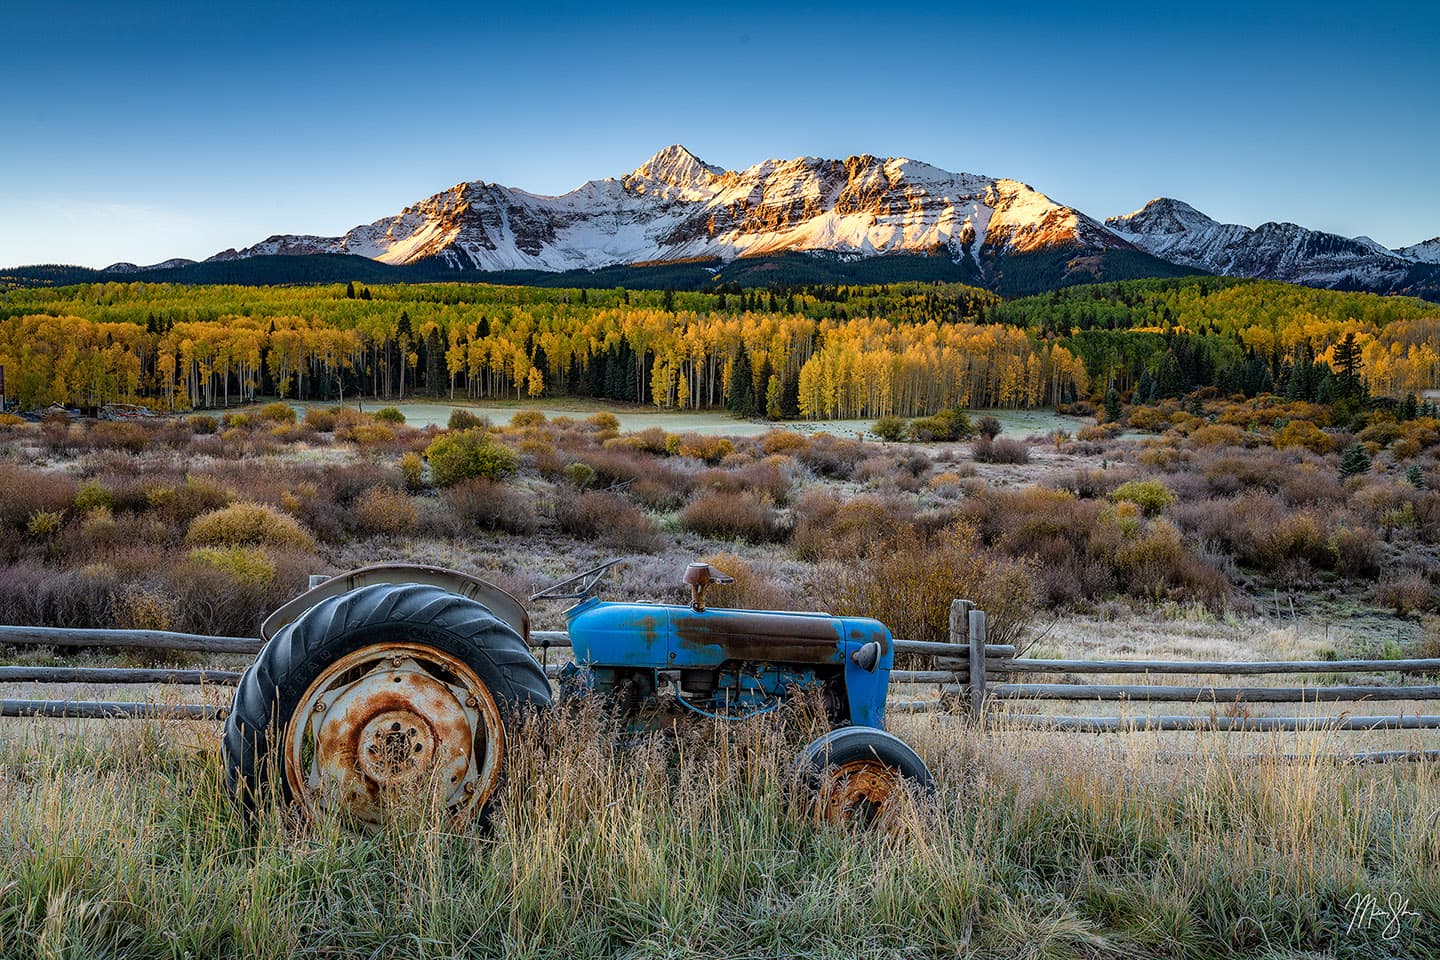 Sunrise at Wilson Peak with an old frost-covered tractor.